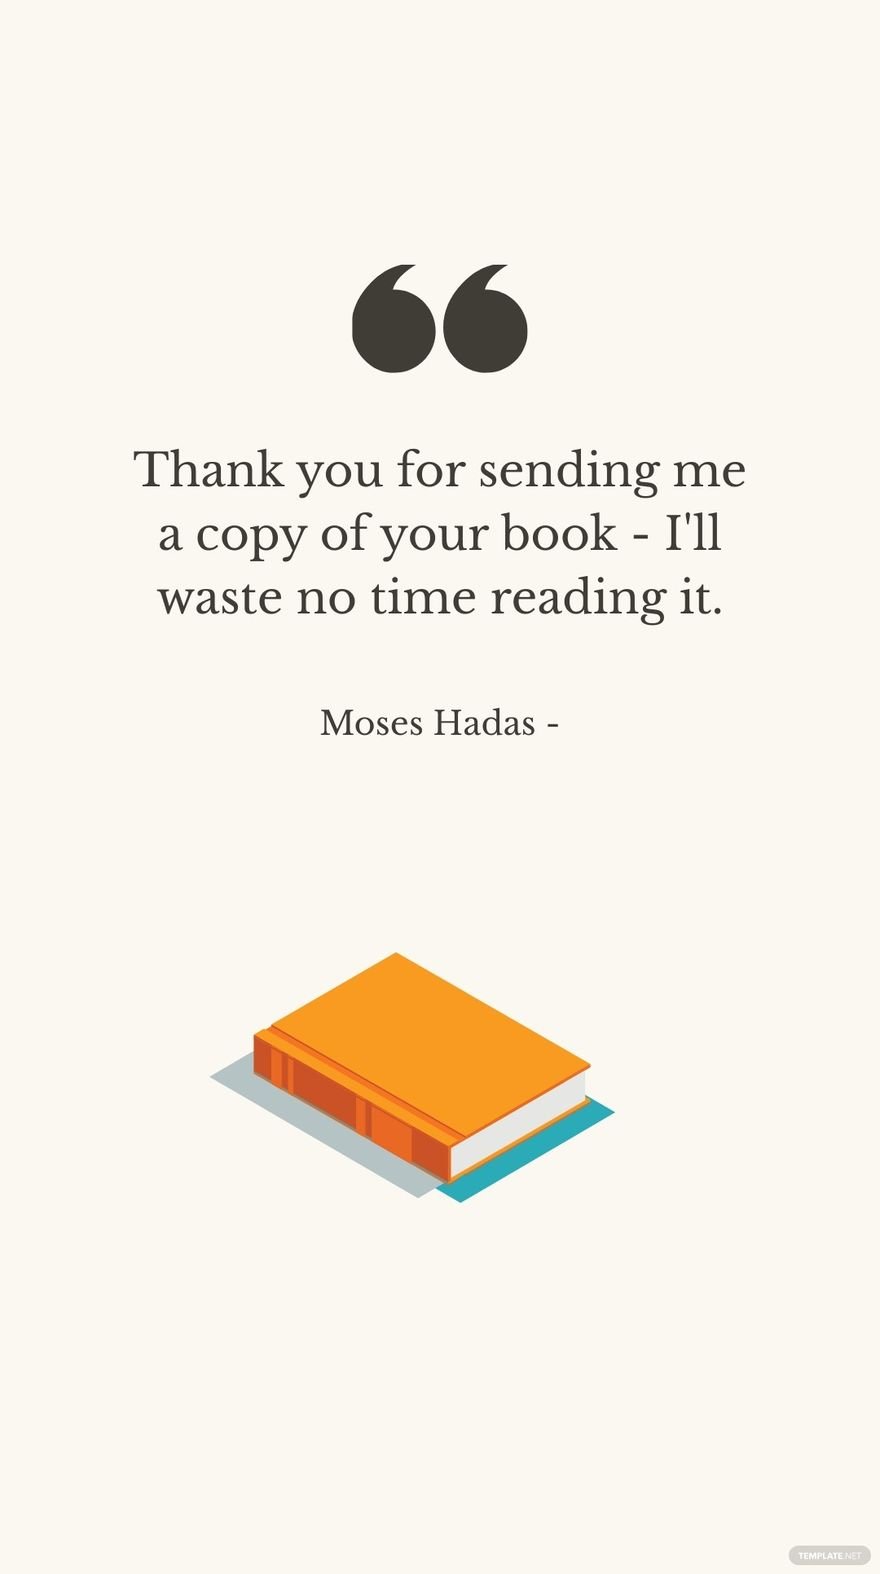 Moses Hadas - Thank you for sending me a copy of your book - I'll waste no time reading it.